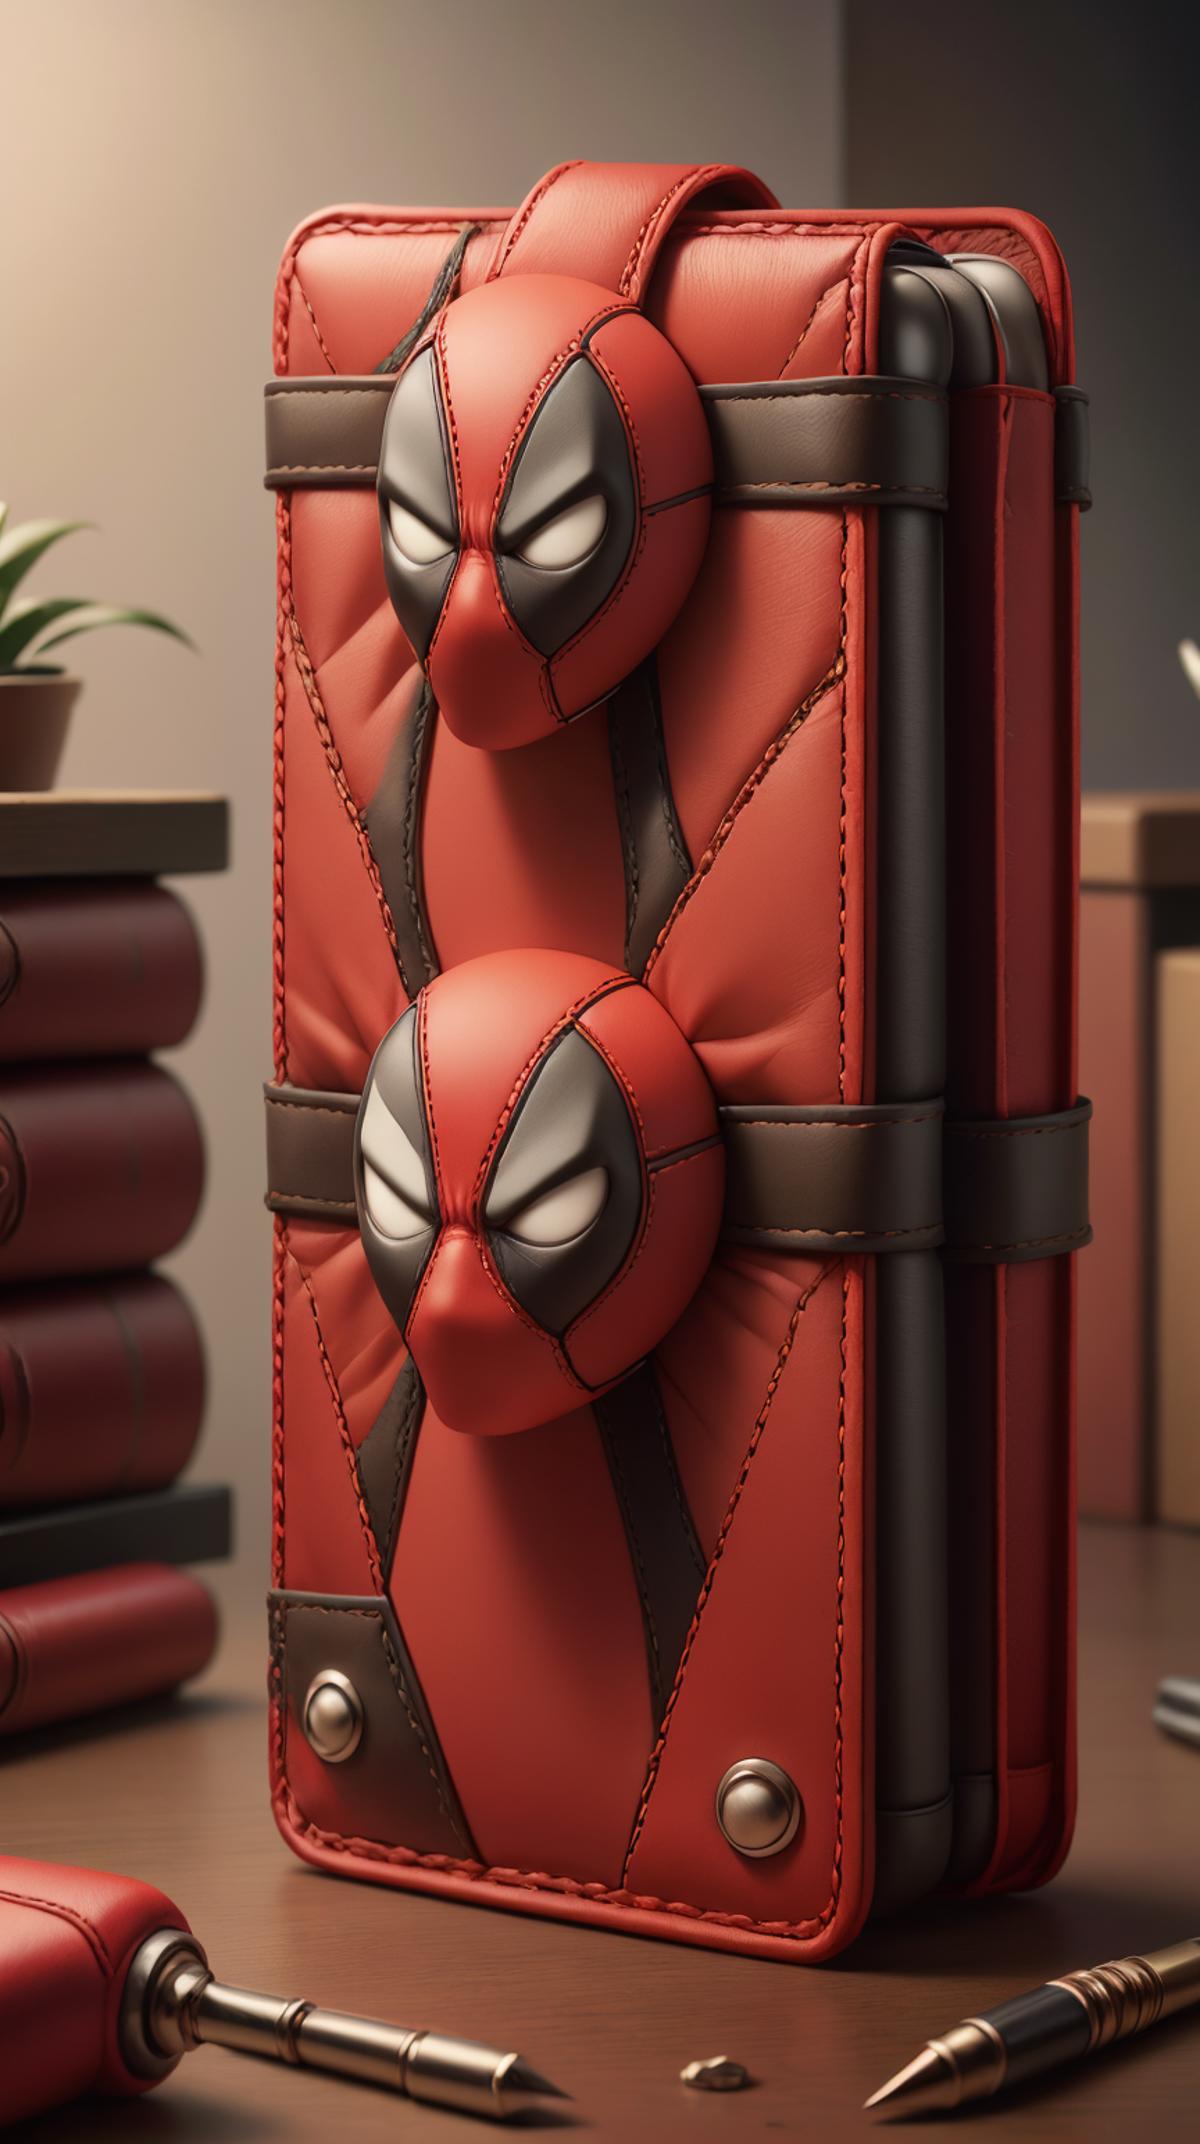 Deadpool-Style! Touch yourself tonight! image by mnemic